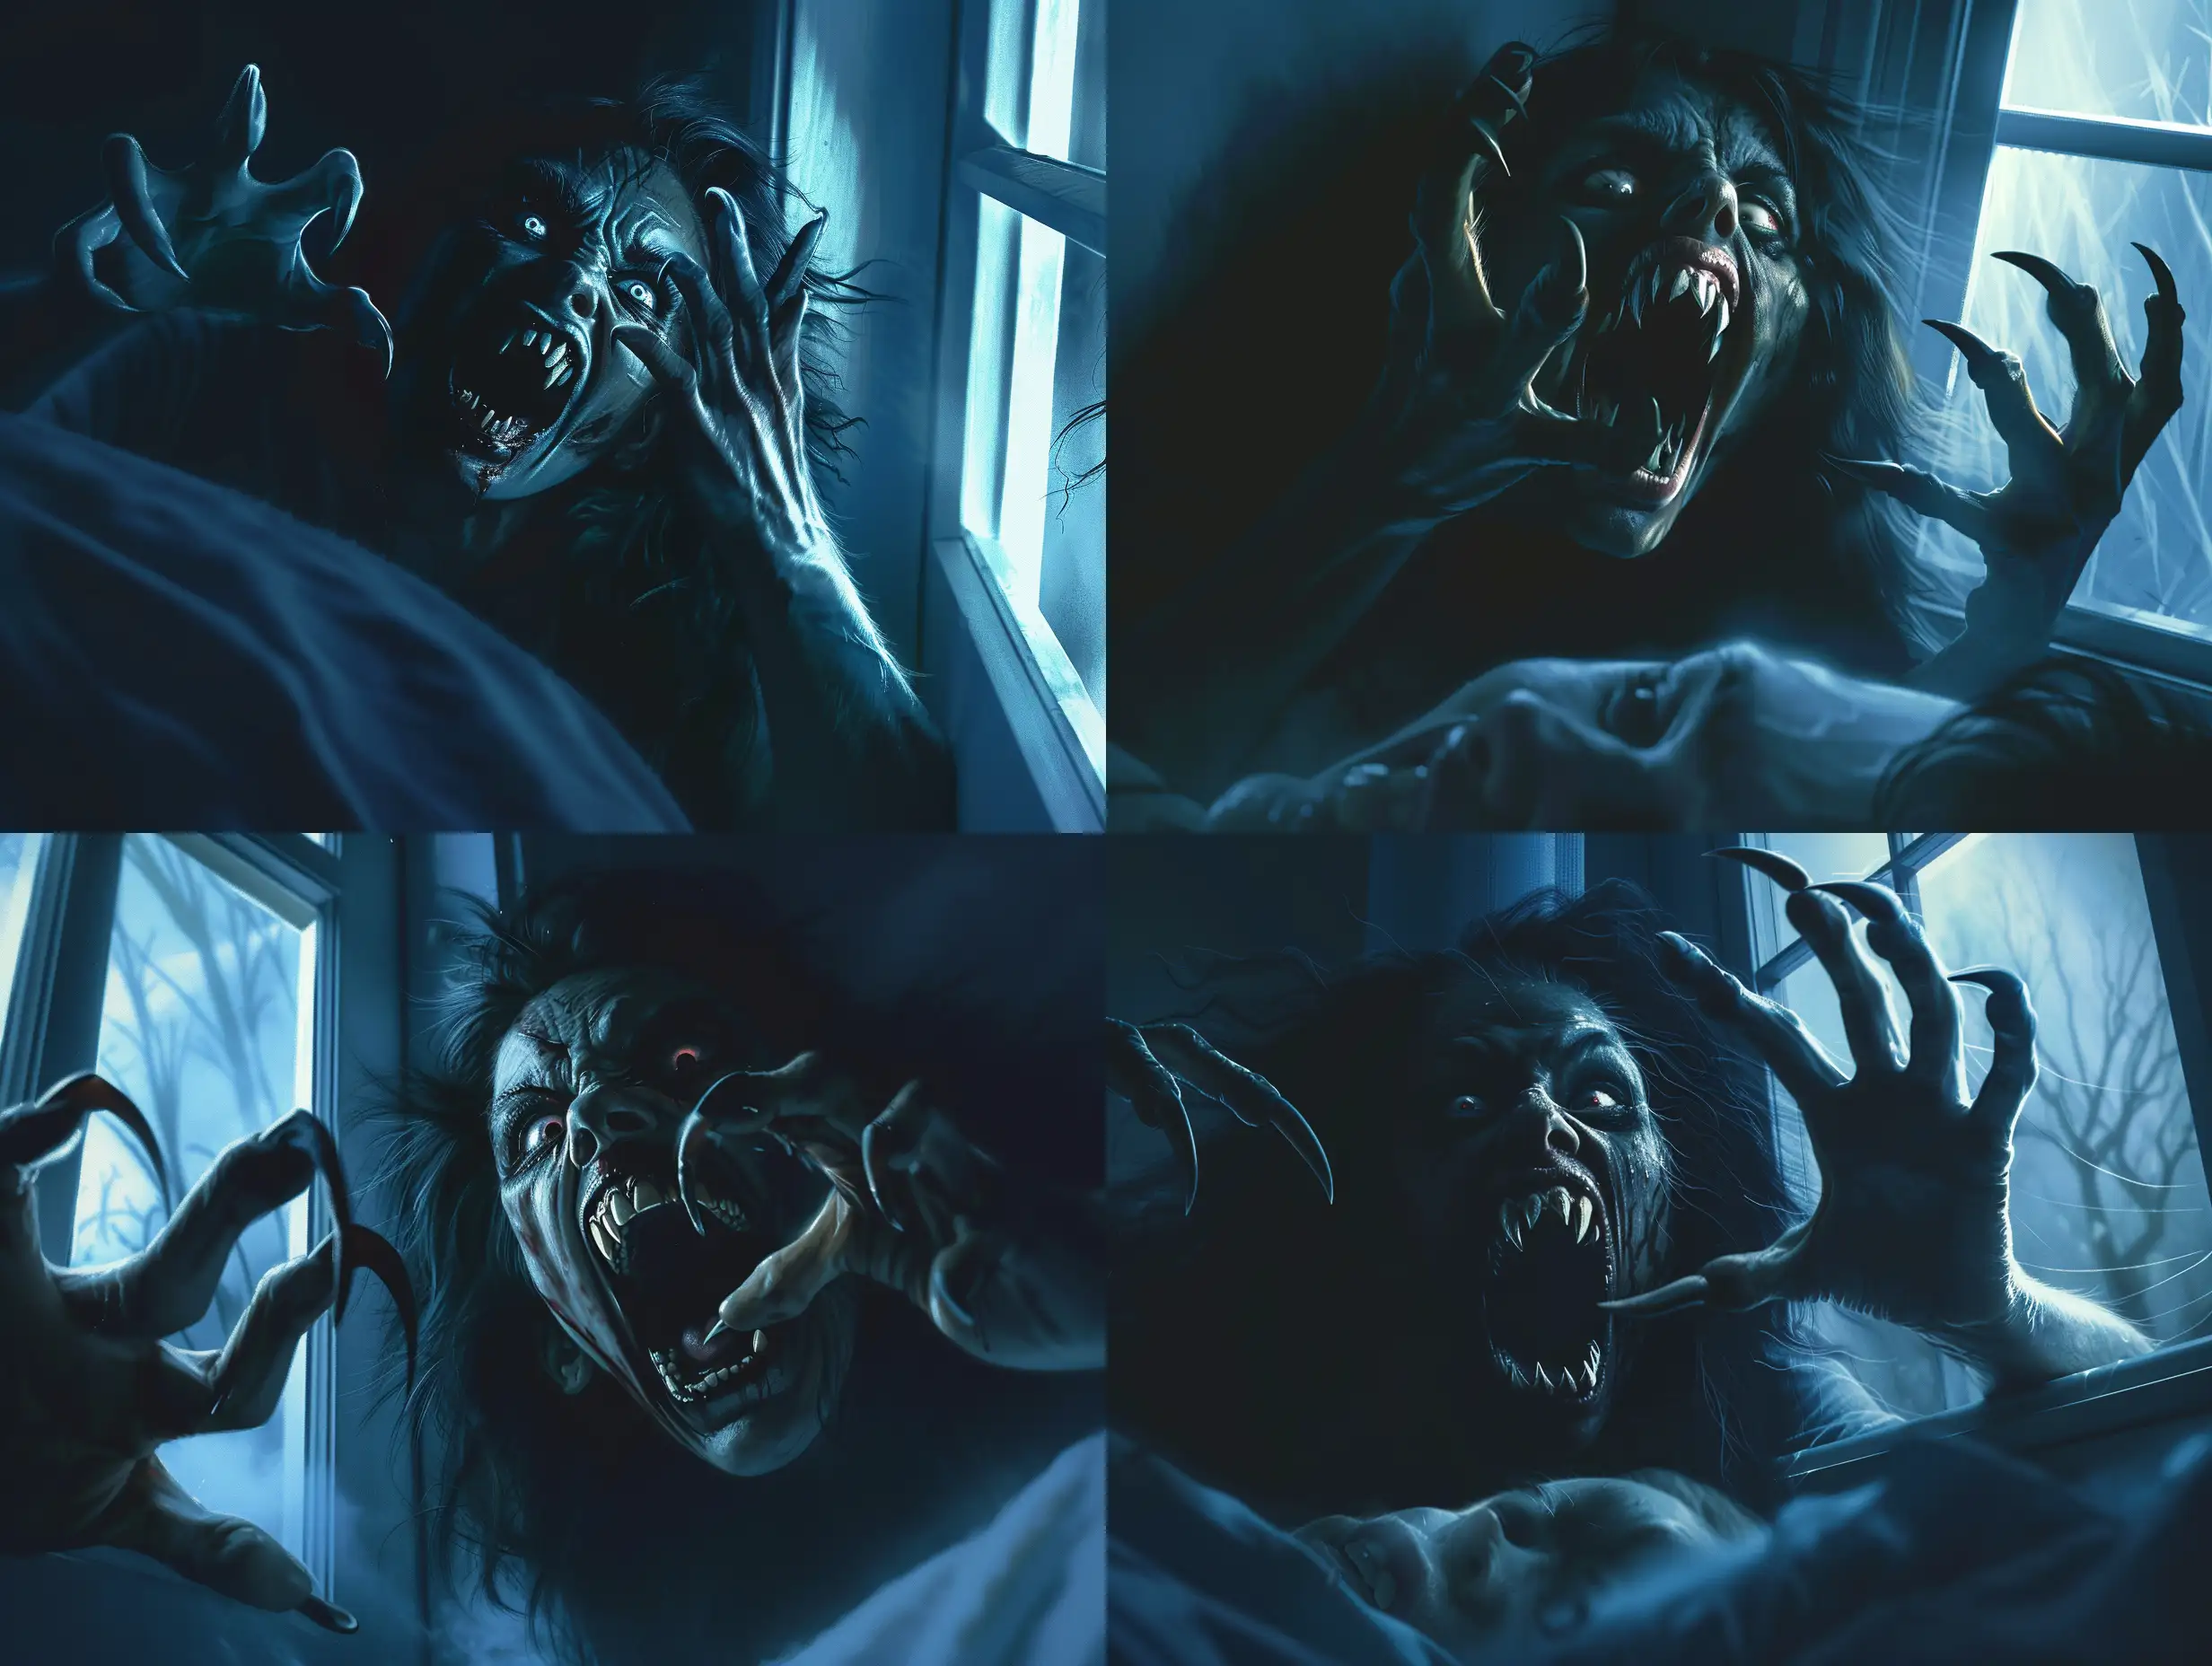 A horrifying nightmare scene of female vampire with long, curved fingernails sticking out of her fingers like menacing claws, her mouth open menacingly, exposing sharp teeth that resemble fangs, she stands at the bedroom window above a sleeping man, hyper-realism, cinematic, high detail, photo detailing, high quality, photorealistic, aggressive, dark atmosphere, realistic, the smallest details, detailed nails, horror, atmospheric lighting, full anatomical, photorealism, detailed, textured, dark, haunting, night-time scene, intense, creepy, undead, spooky, eerie, atmospheric lighting, nightmare, grotesque, terrifying, realistic anatomy, human hands, very clear without flaws with five fingers.